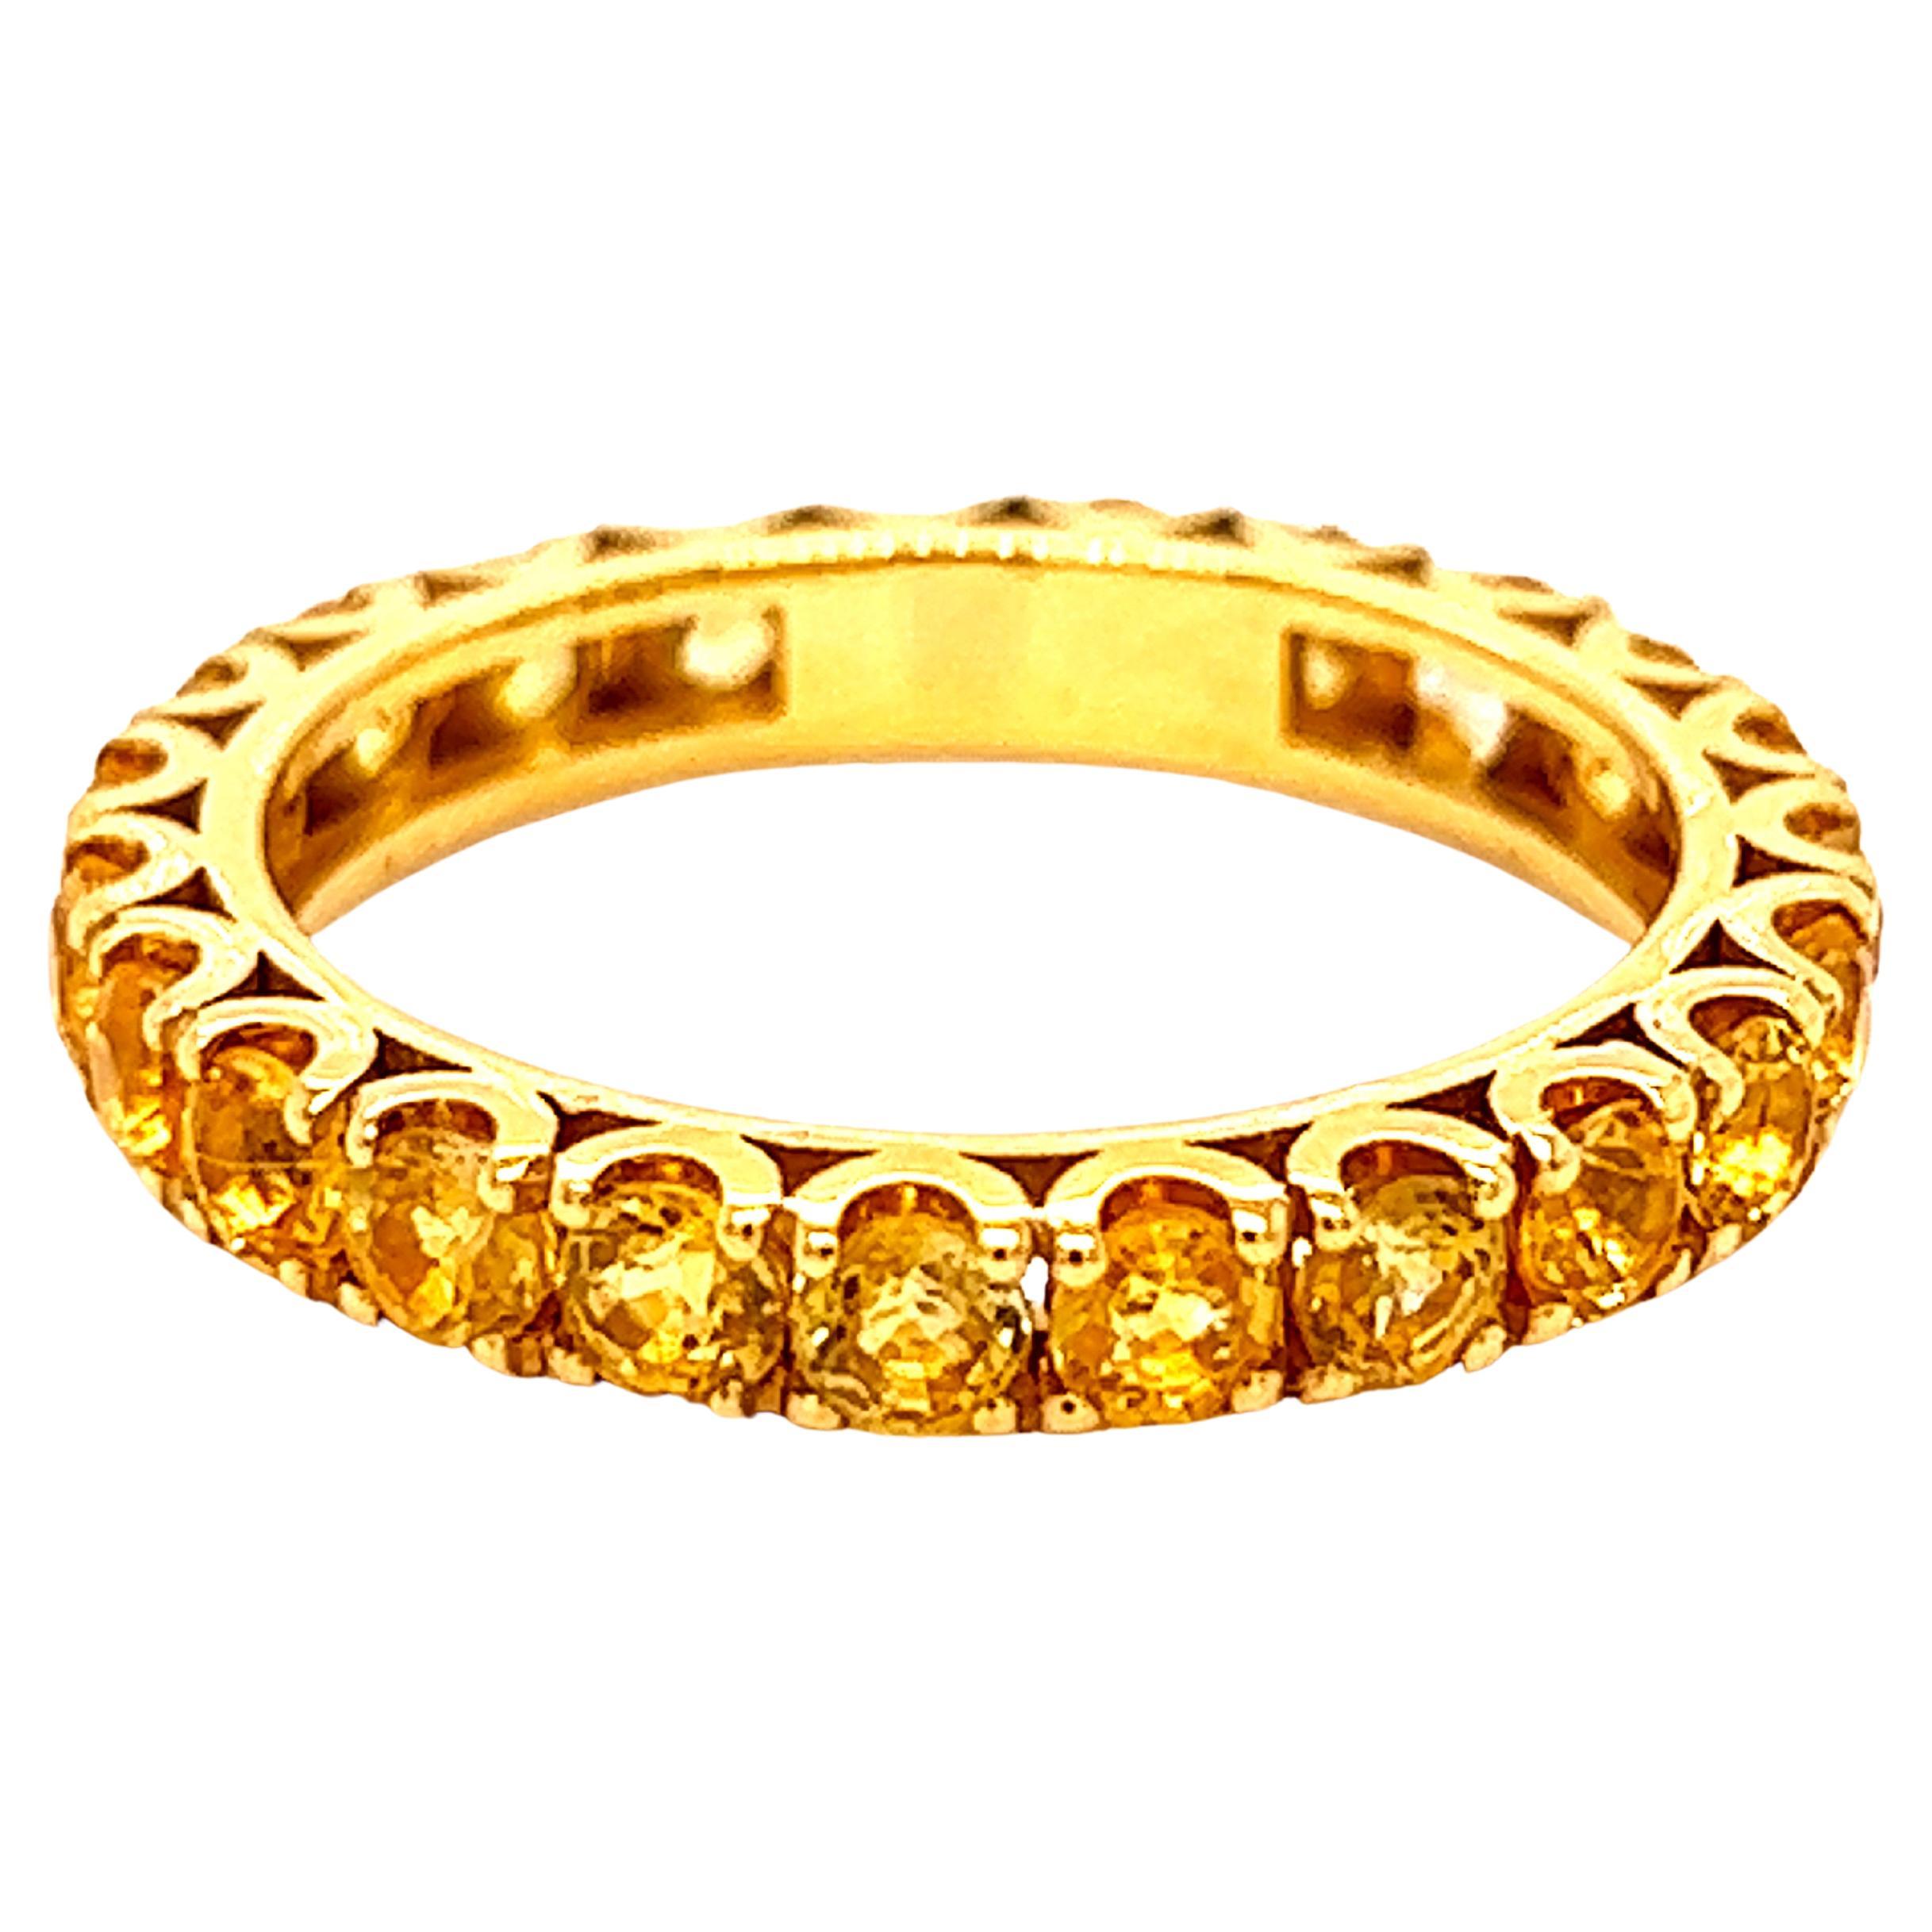 Berca 2.11 Carat Natural Yellow Sapphire 18 Karat Gold Eternity Band Ring For Sale